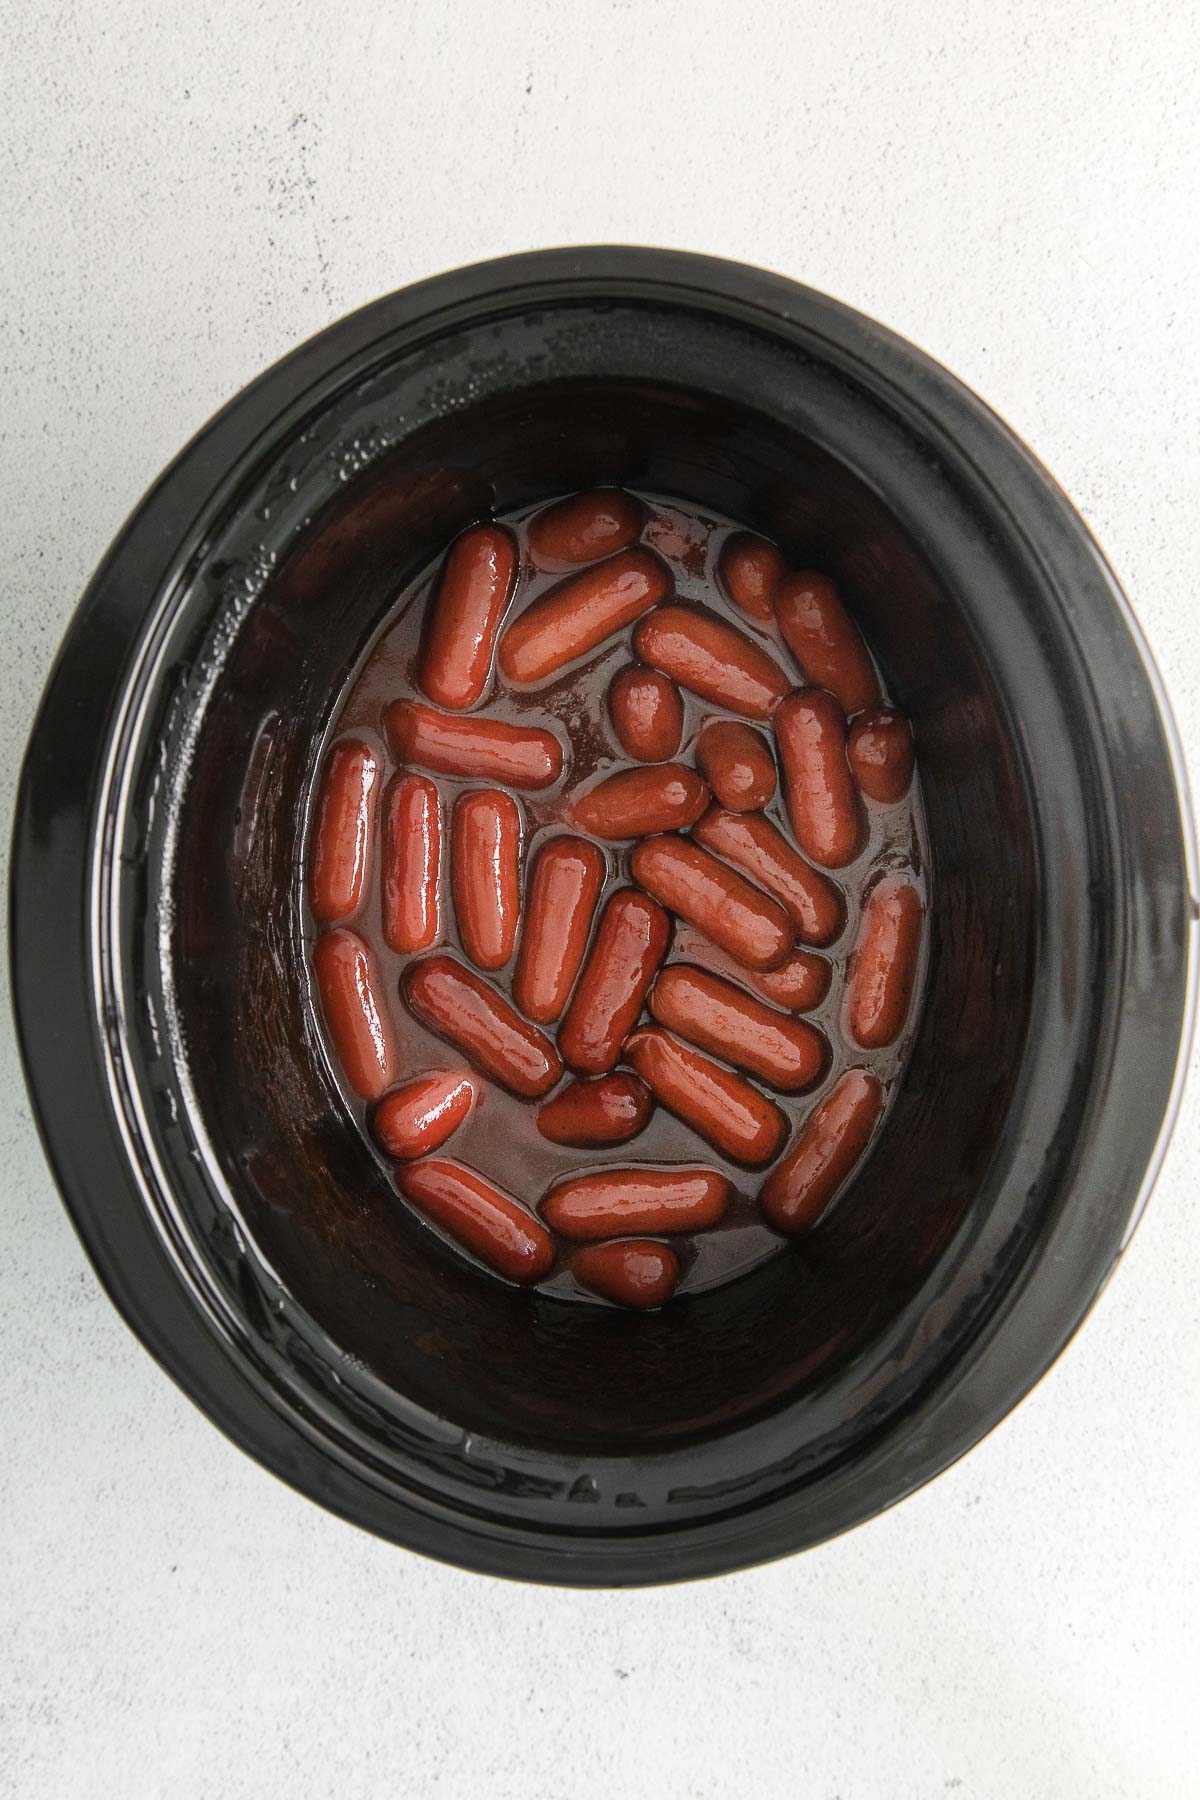 little smokies cocktail sausages cooking in a bbq sauce in a black crock pot